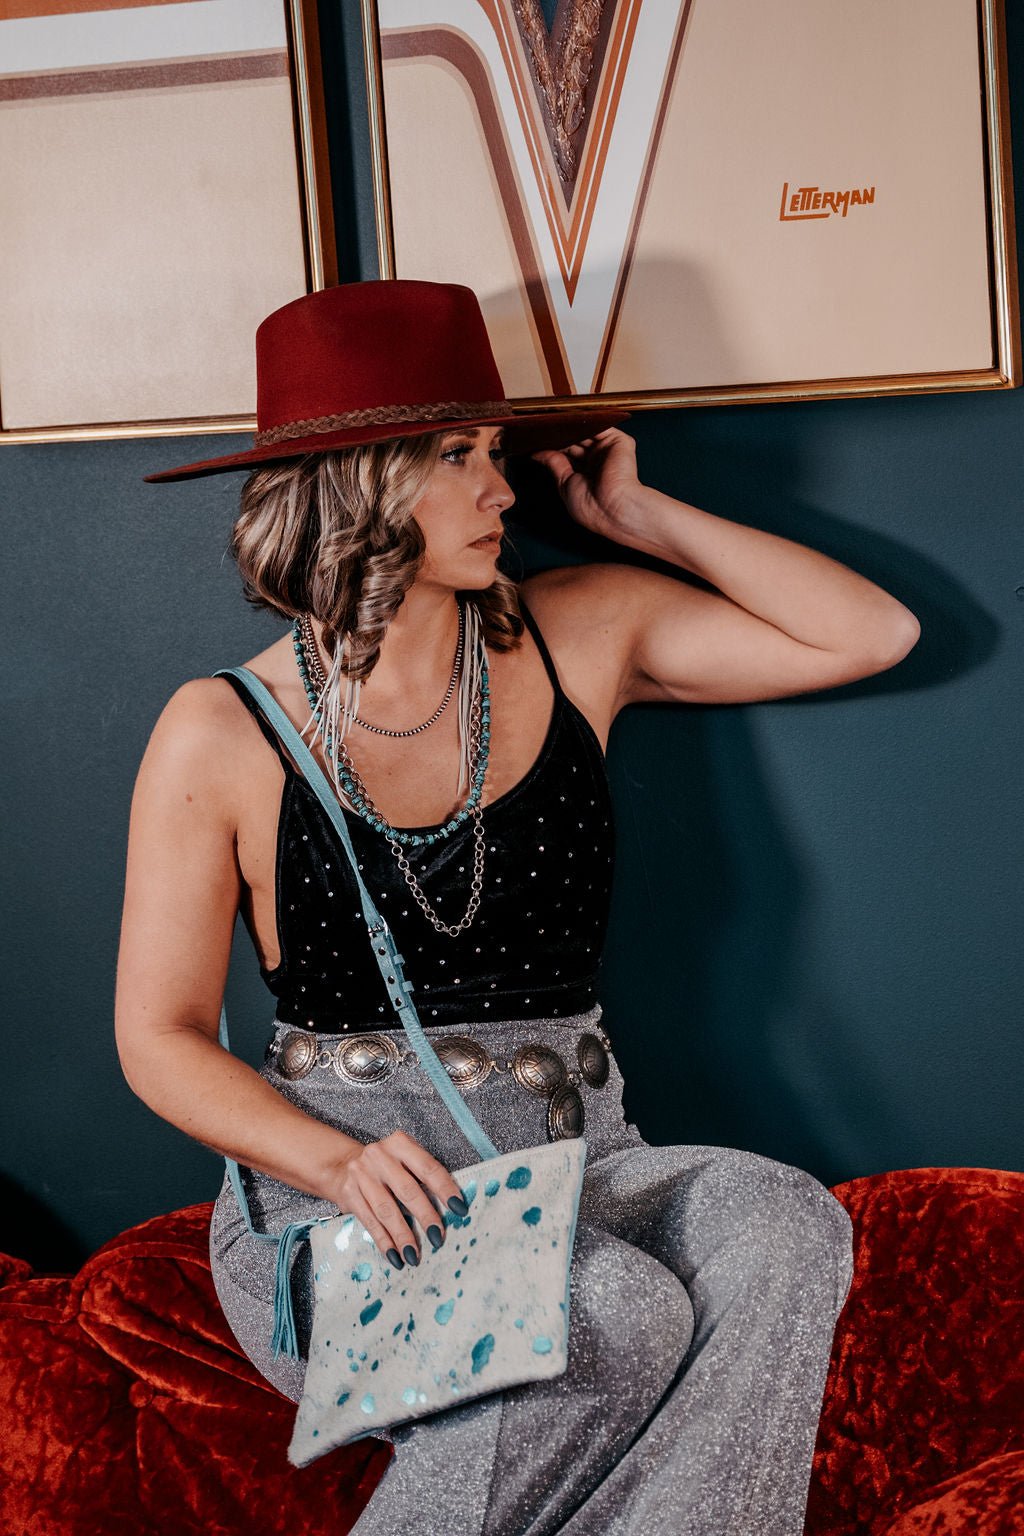 Turquoise Cowhide Beaudin Crossbody –